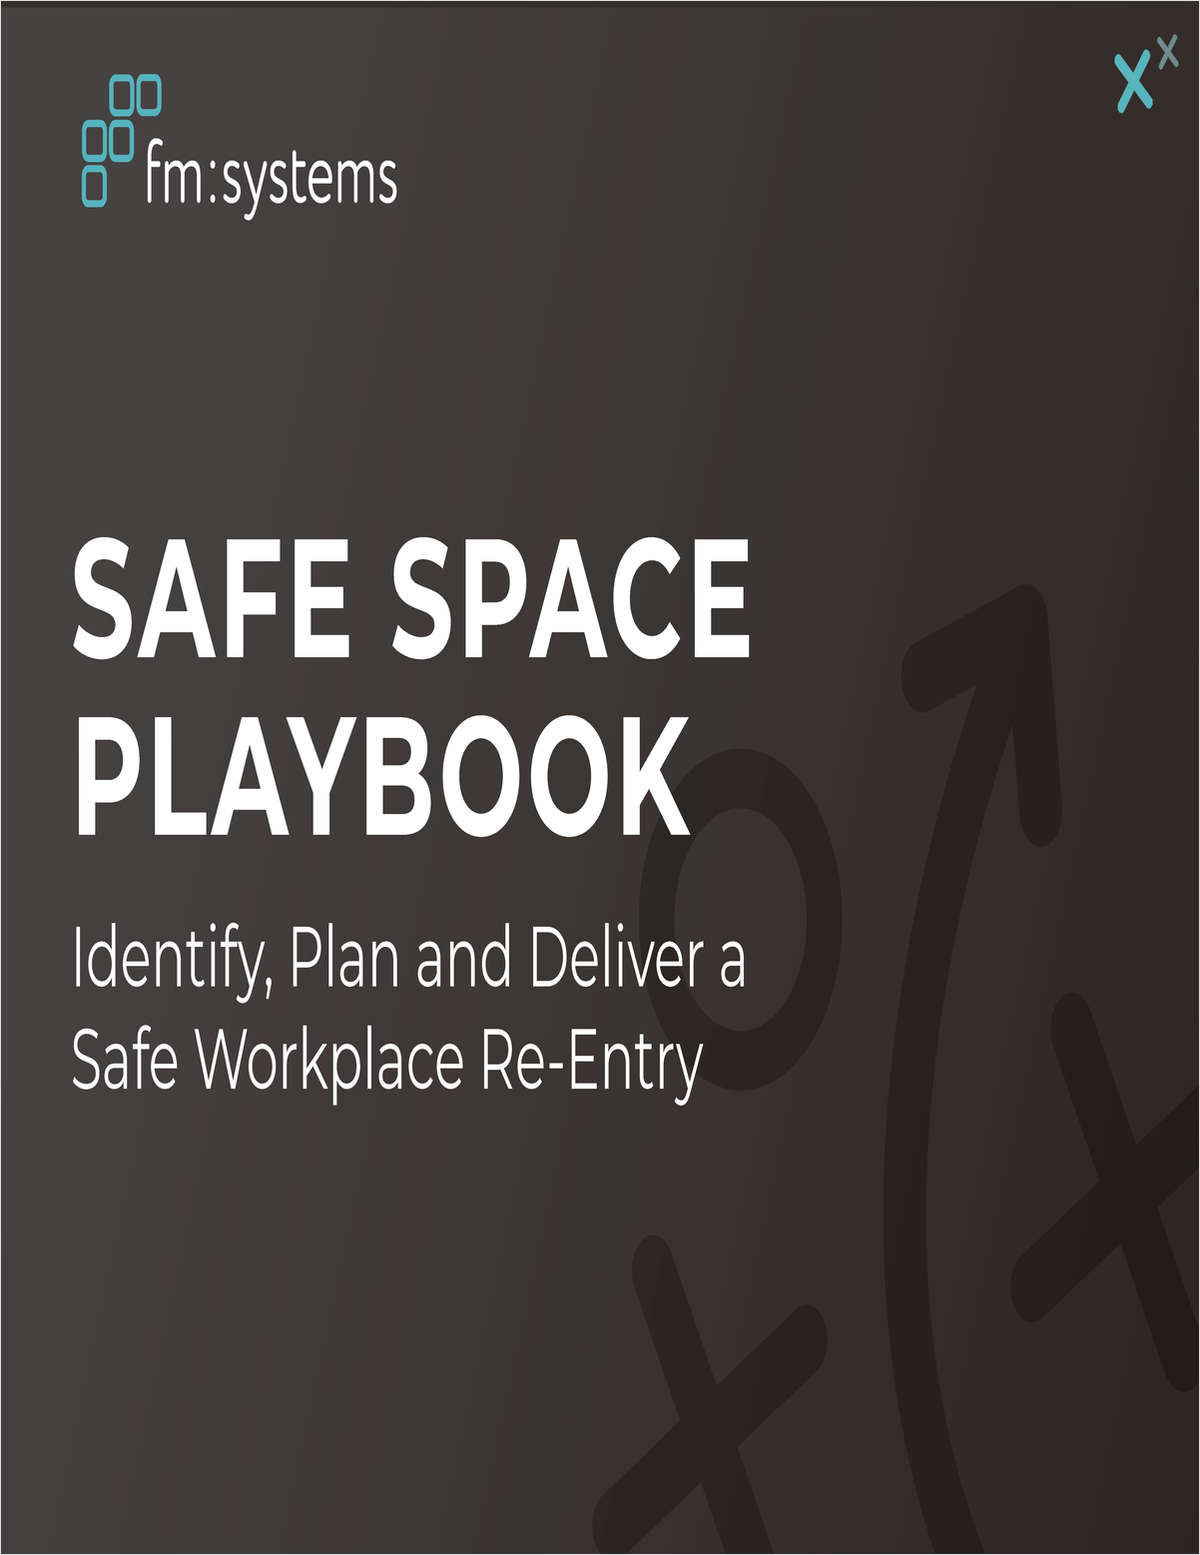 Safe Space Playbook - Post COVID-19 Workplace Re-Entry